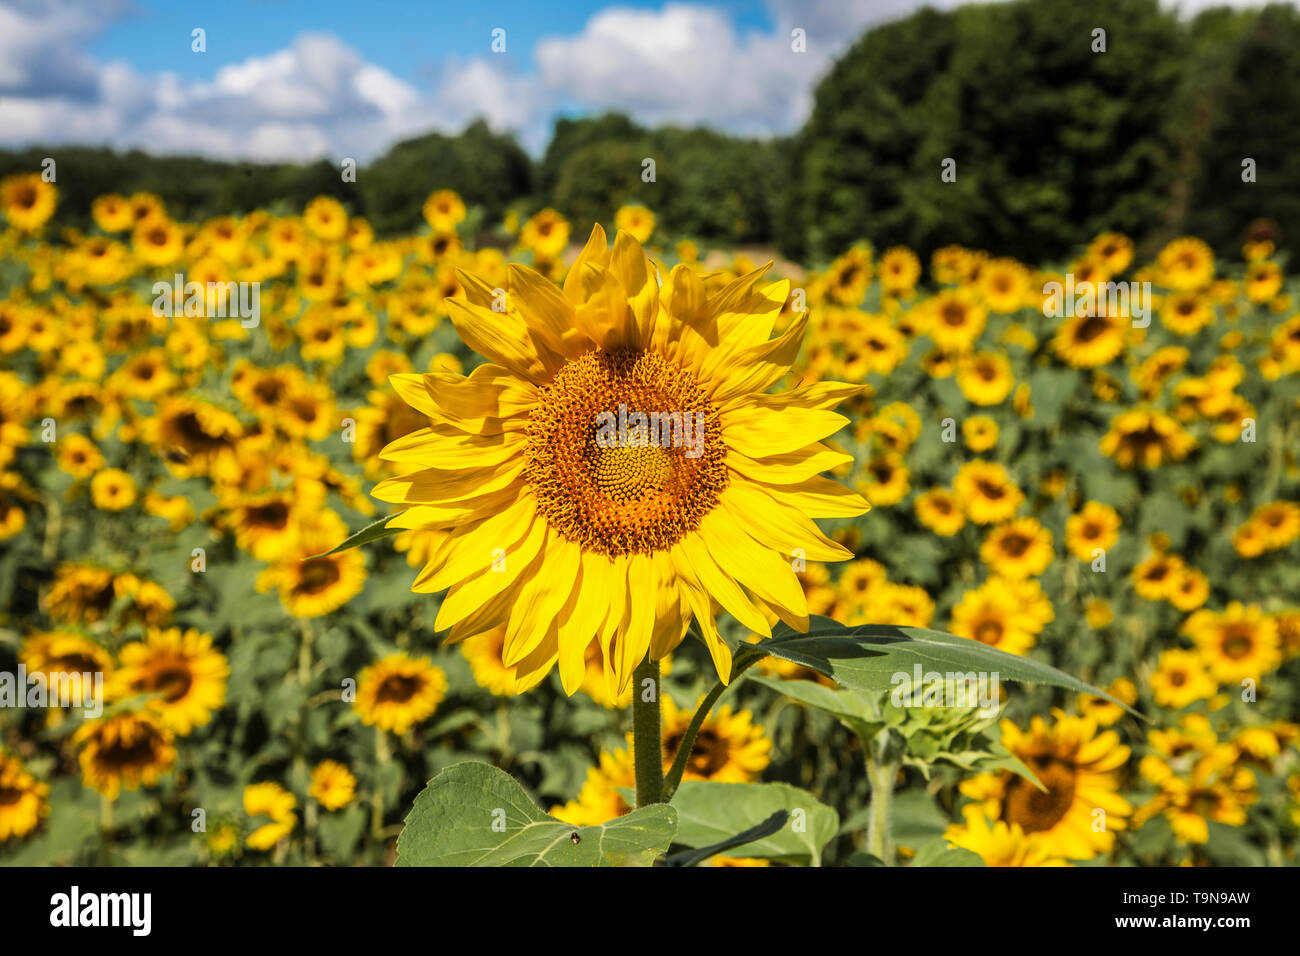 Yellow sunflowers in a field, one standing out, Rochester, upstate New York farmland USA, stand out pt colourful garden annuals farm land Stock Photo